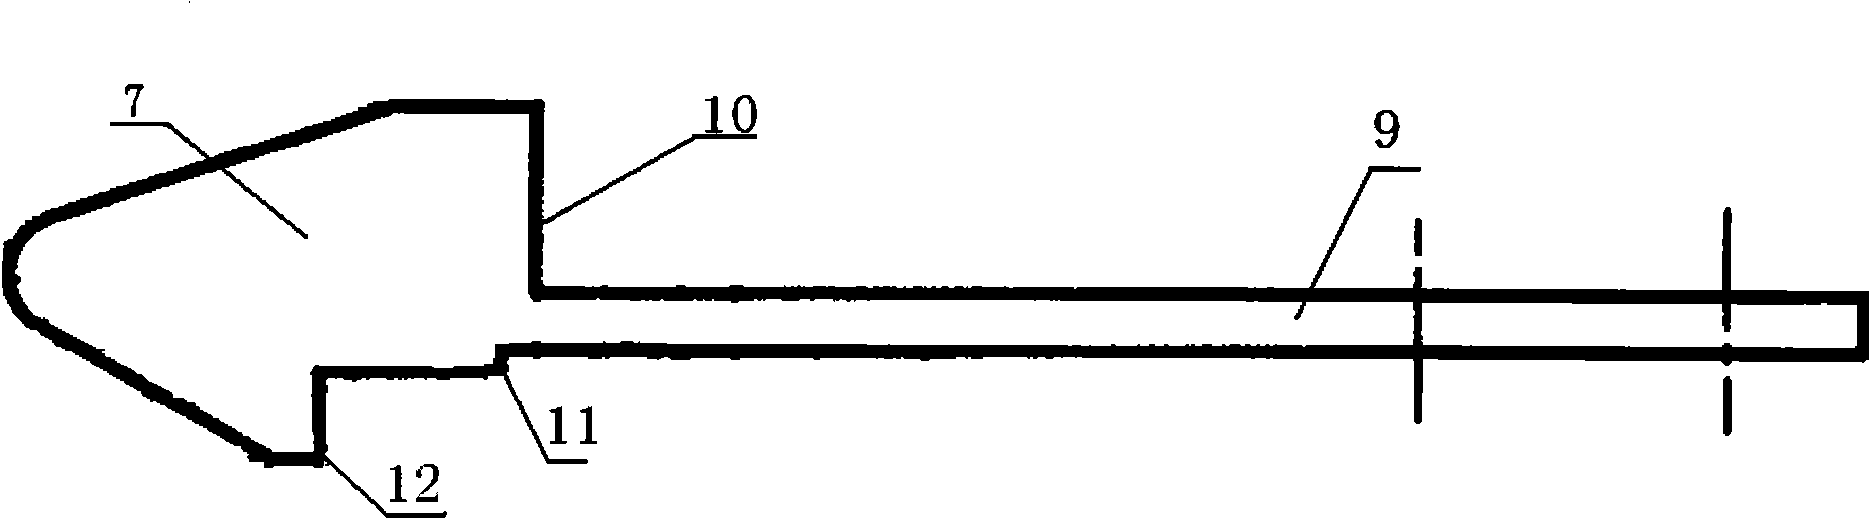 Positioning connection structure of follower assembly and absorber assembly